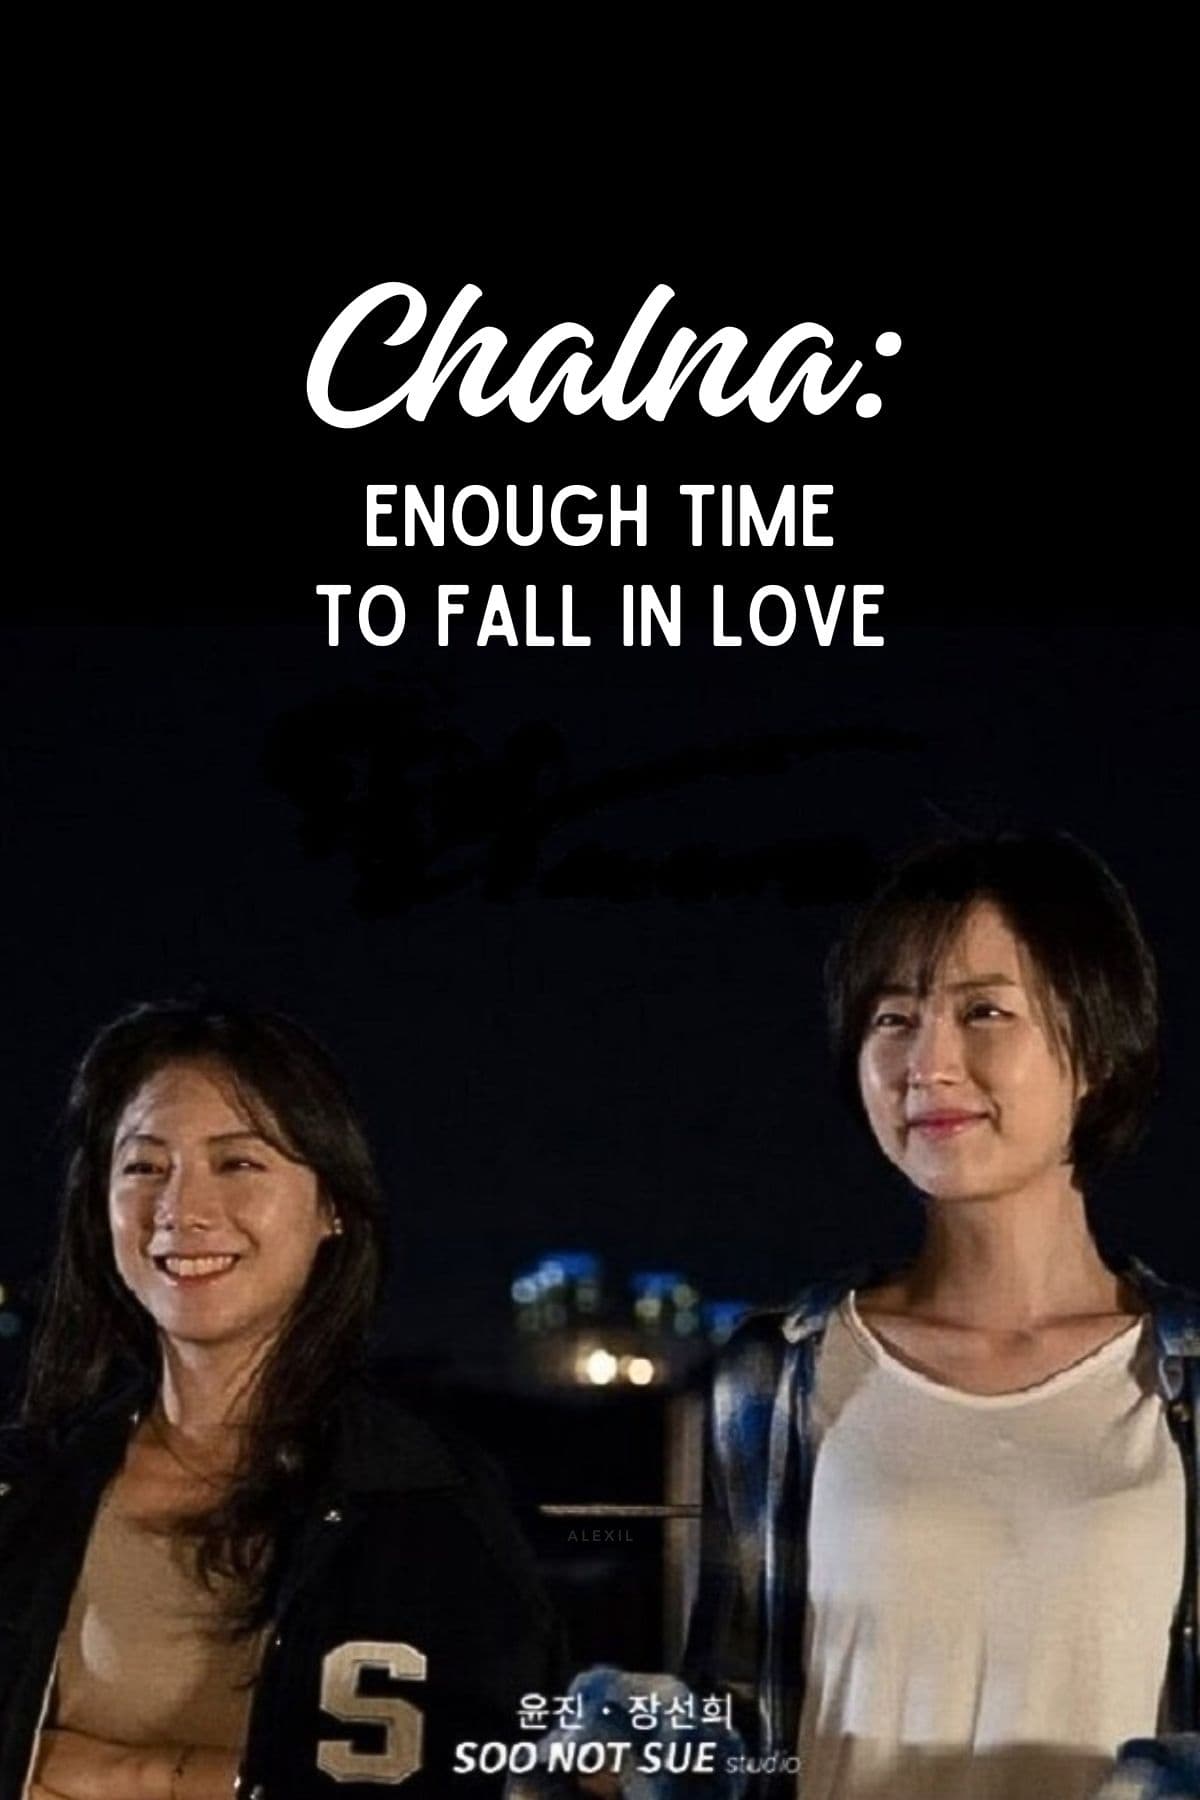 Chalna: Enough Time to Fall in Love